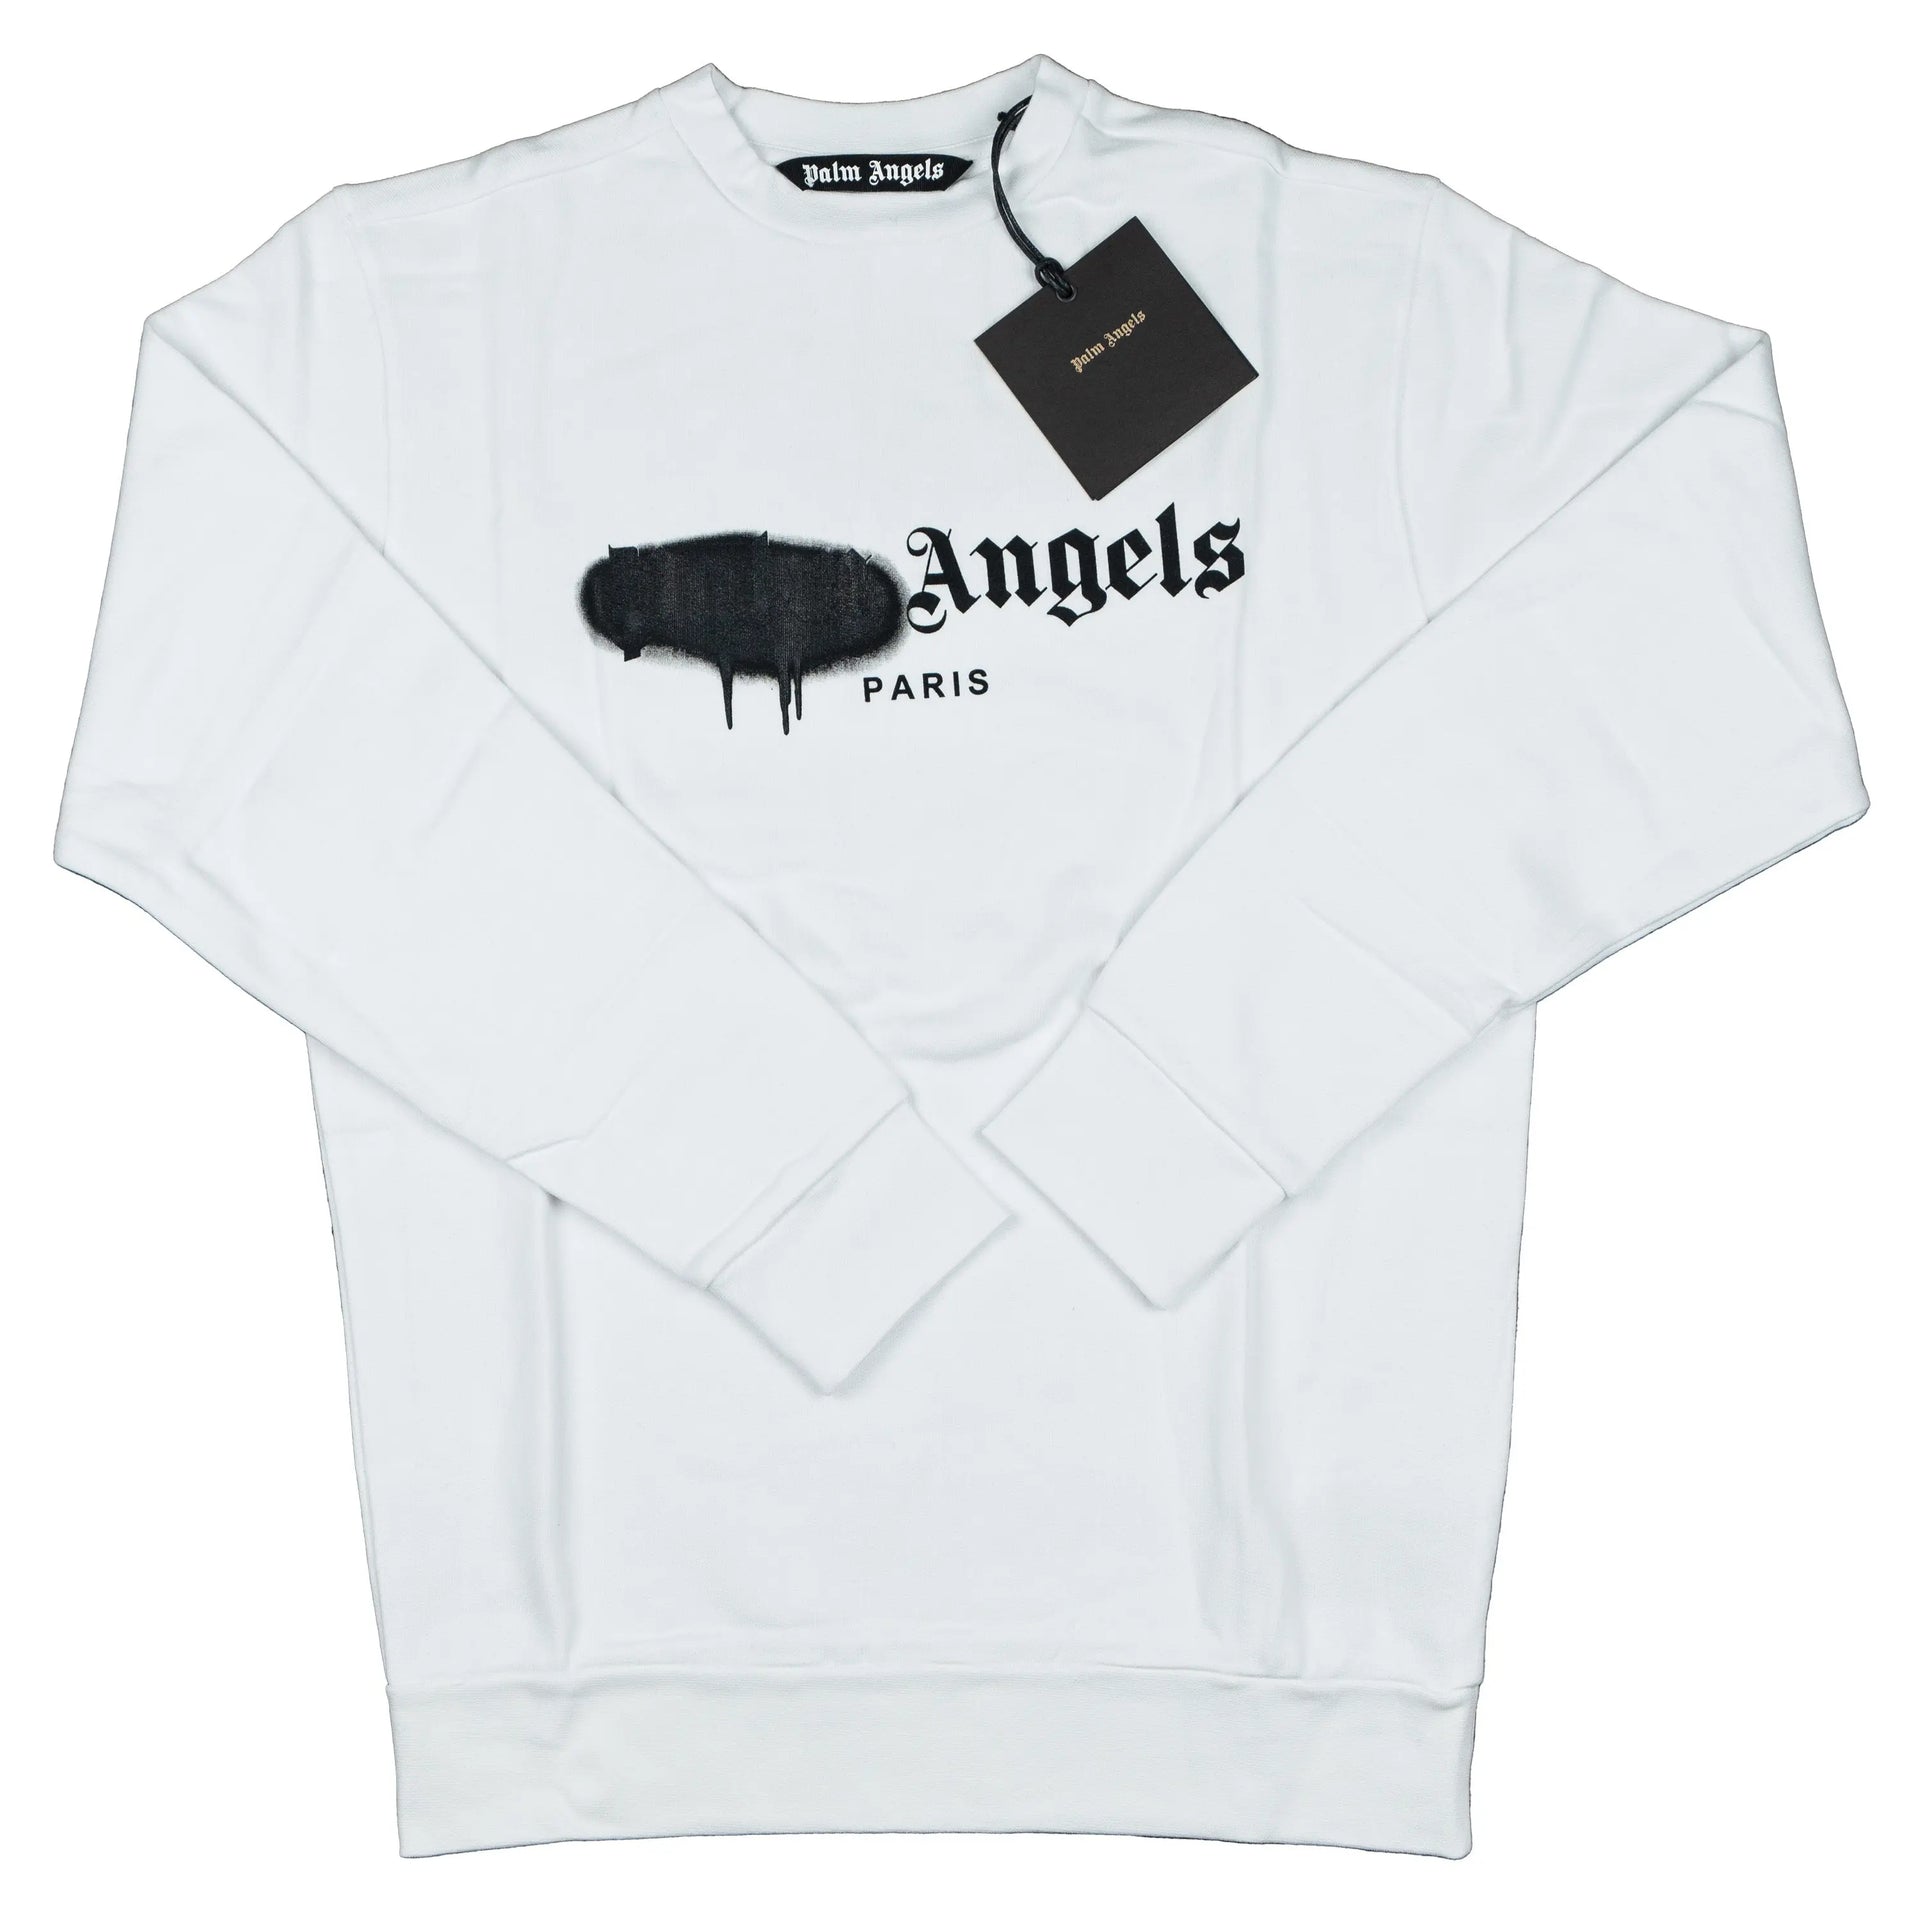 PALM PARIS TRACK JACKET in black - Palm Angels® Official